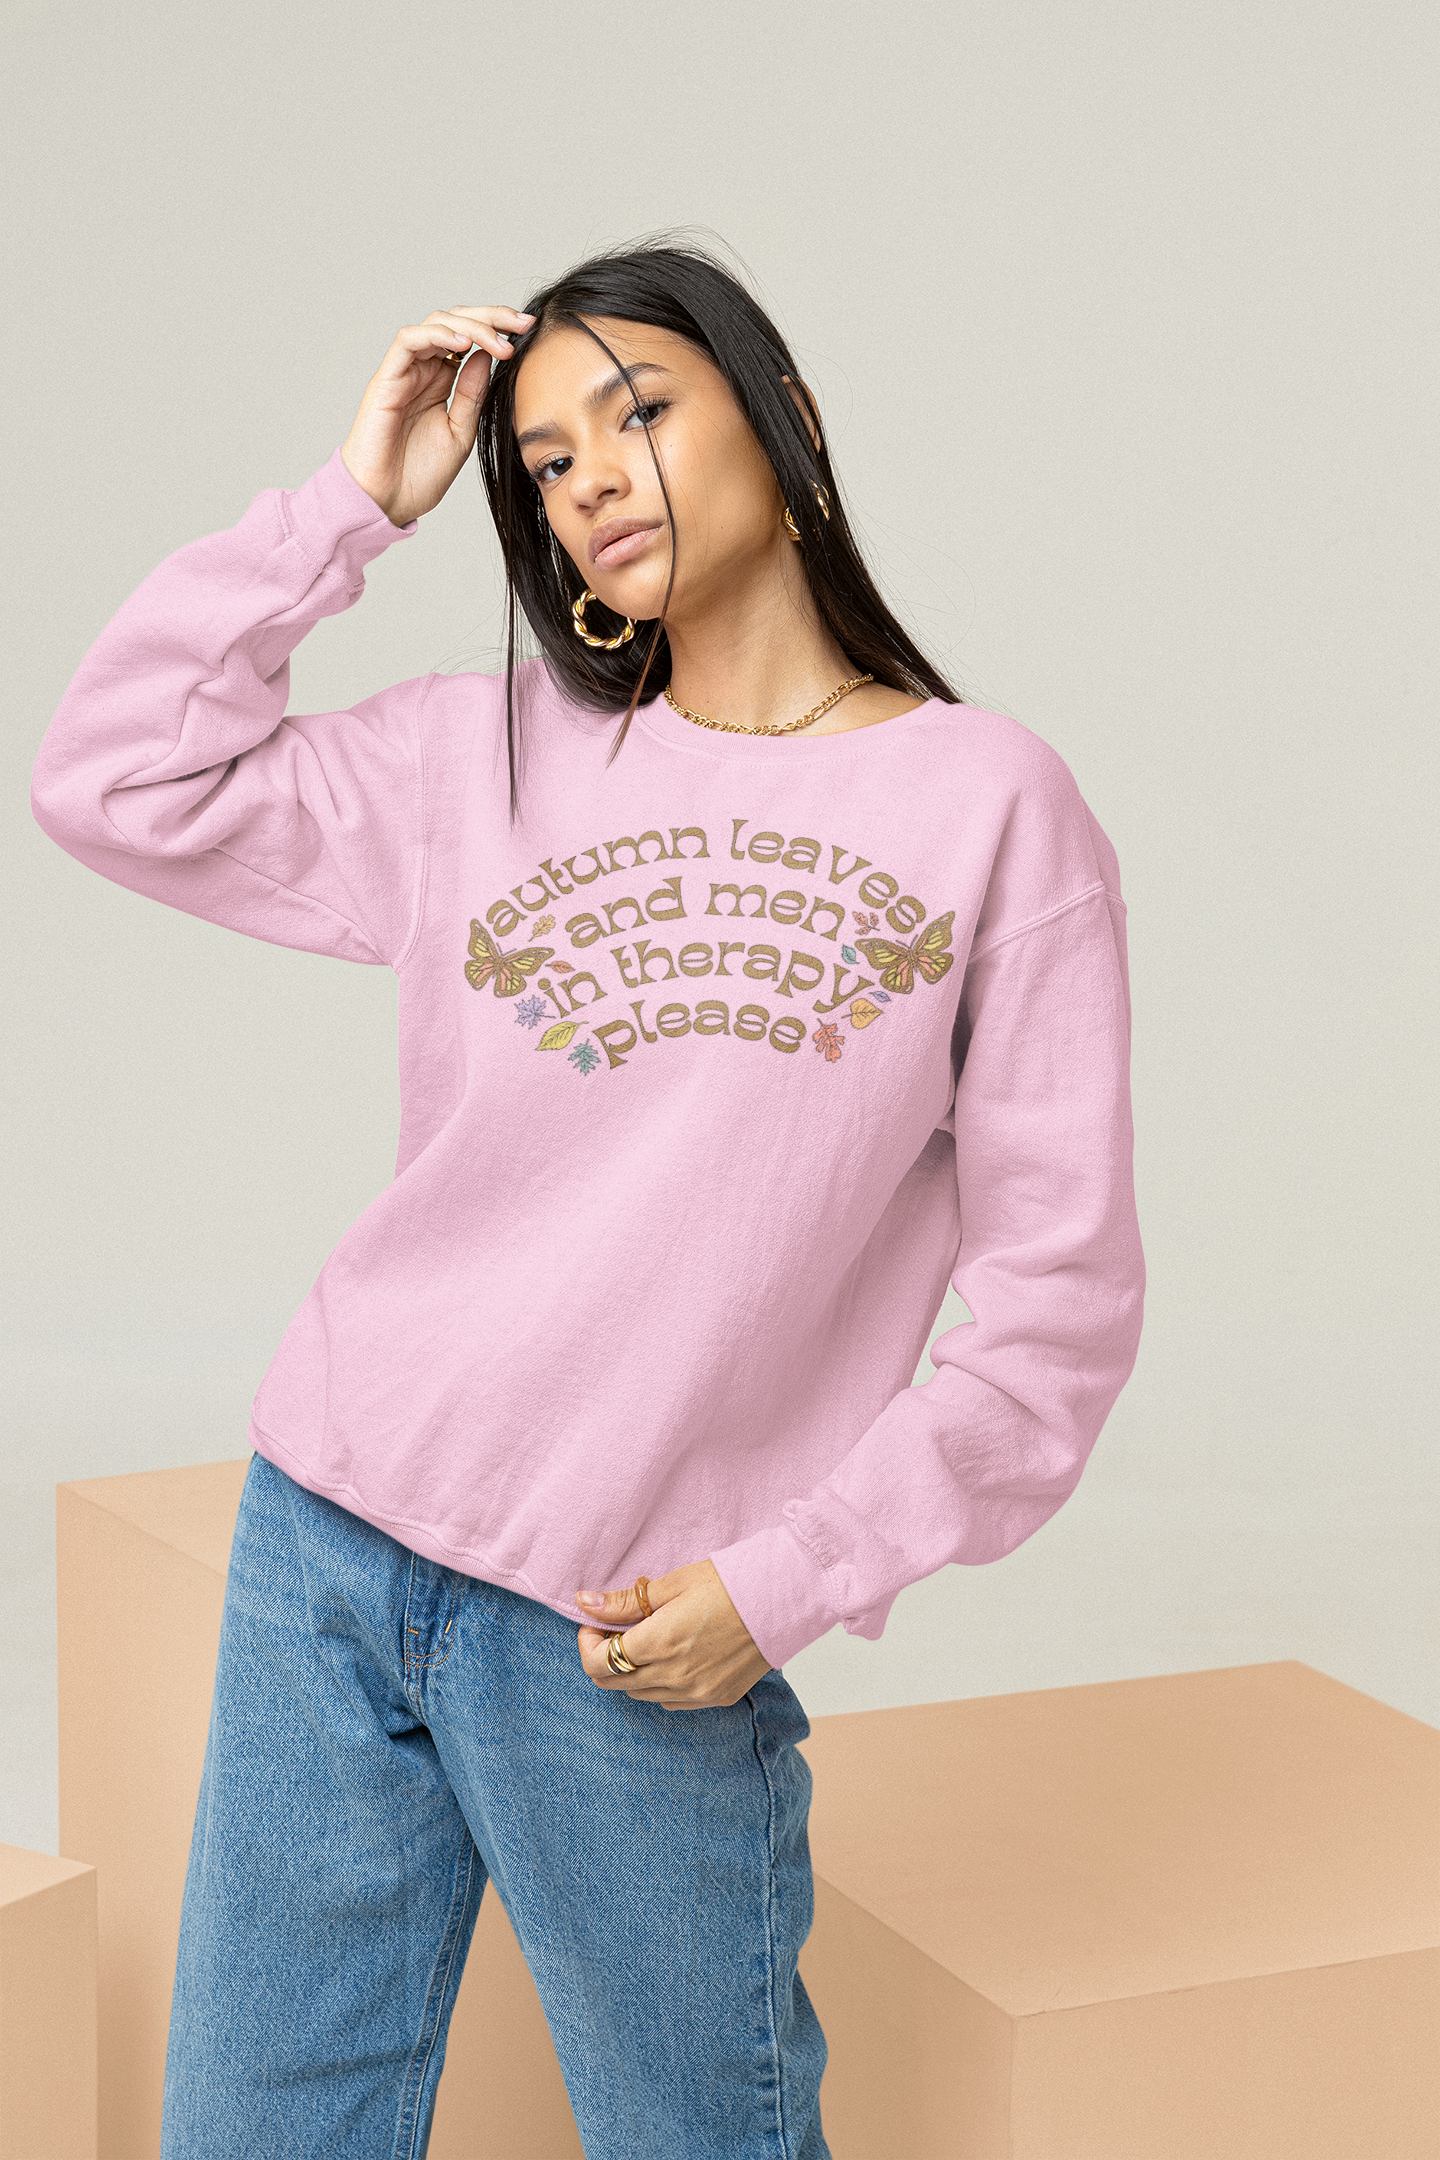 Autumn Leaves And Men In Therapy Please Unisex Feminist Sweatshirt - Shop Women’s Rights T-shirts - Oversized Pink Sweatshirt